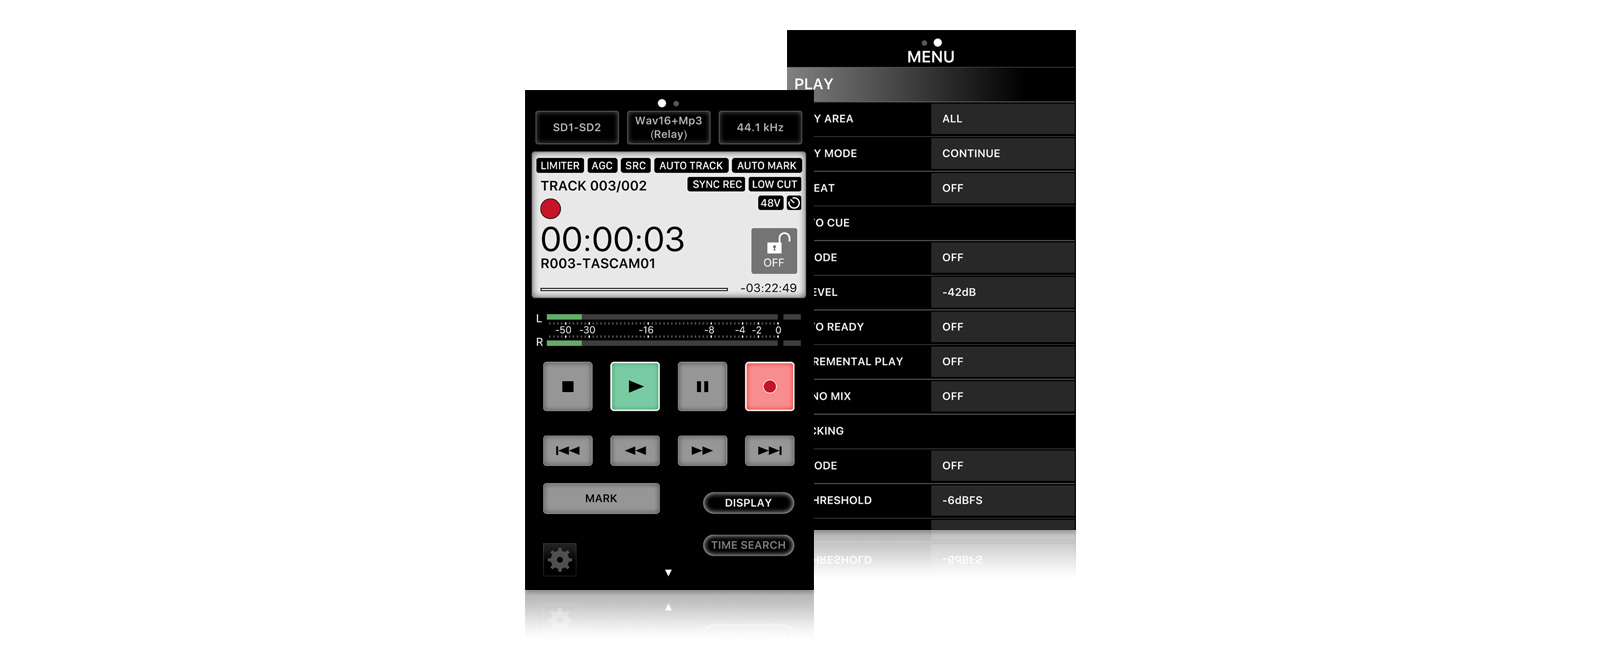 『TASCAM SS250 CONTROL』の最新ソフトウェアV2.0.1 (Android版)をリリース